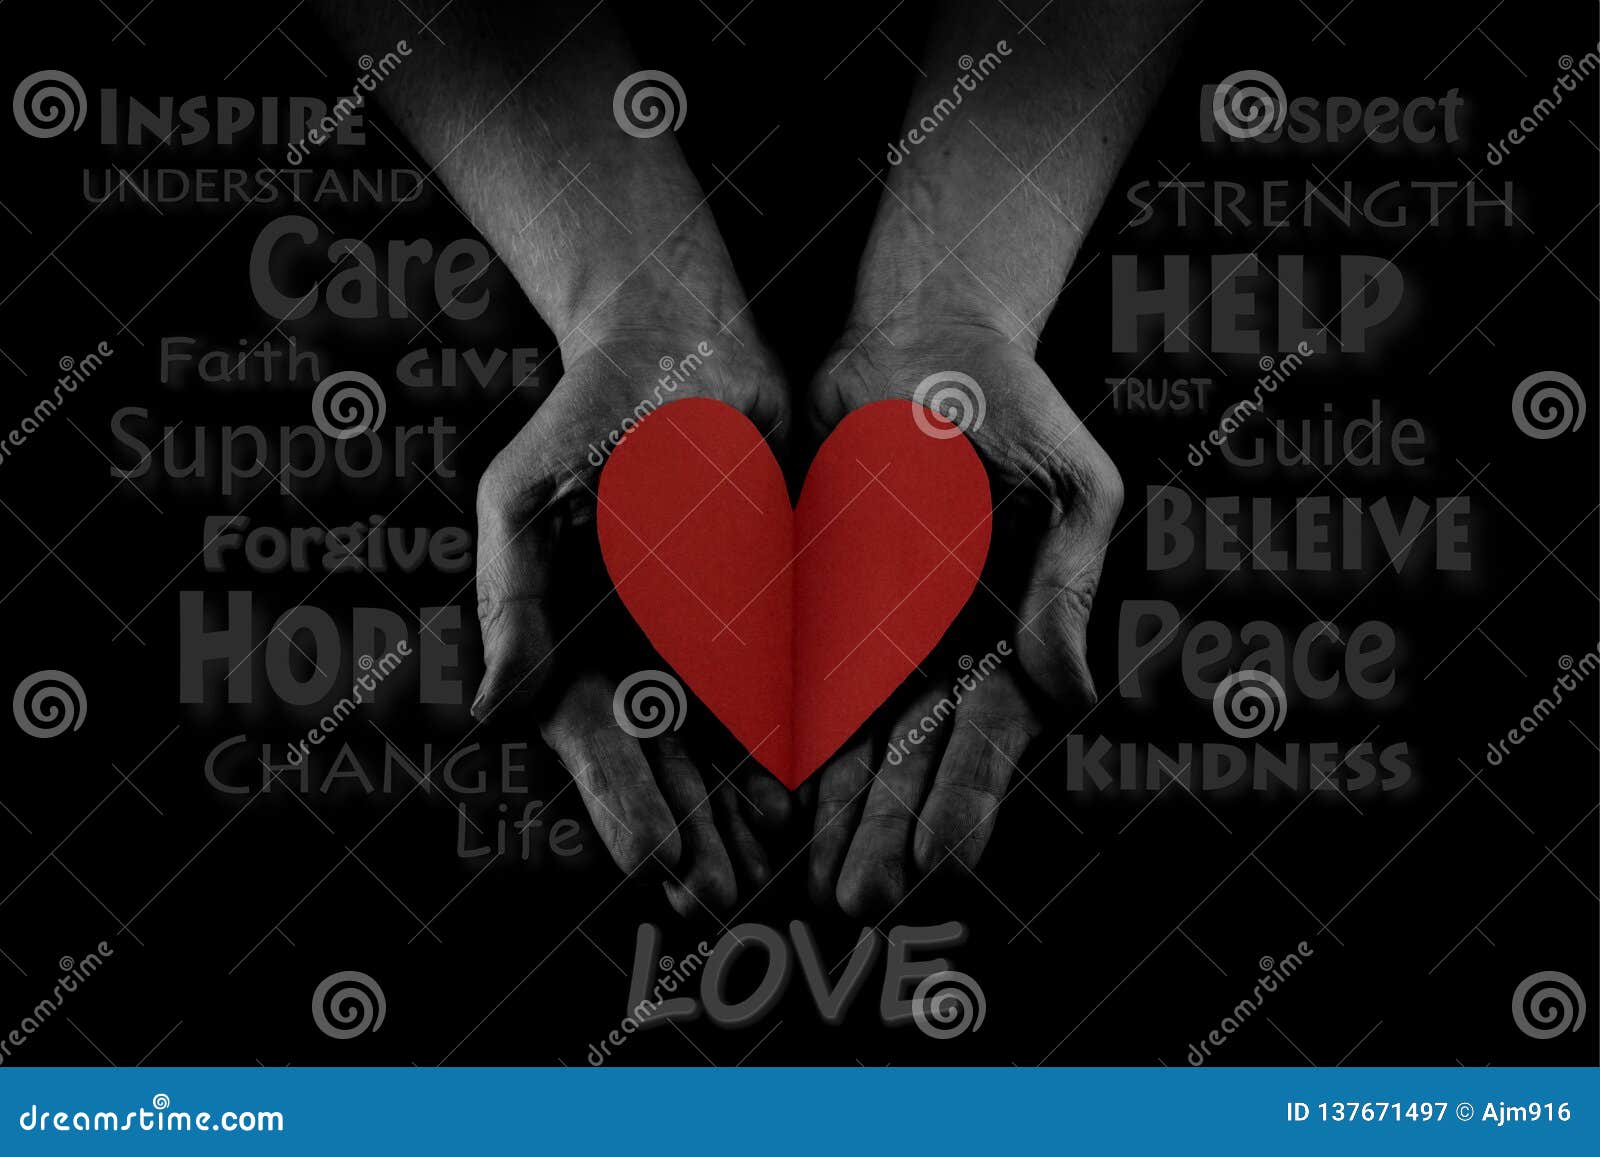 helping hand concept, man`s hands palms up, giving red heart, reaching out. word cloud